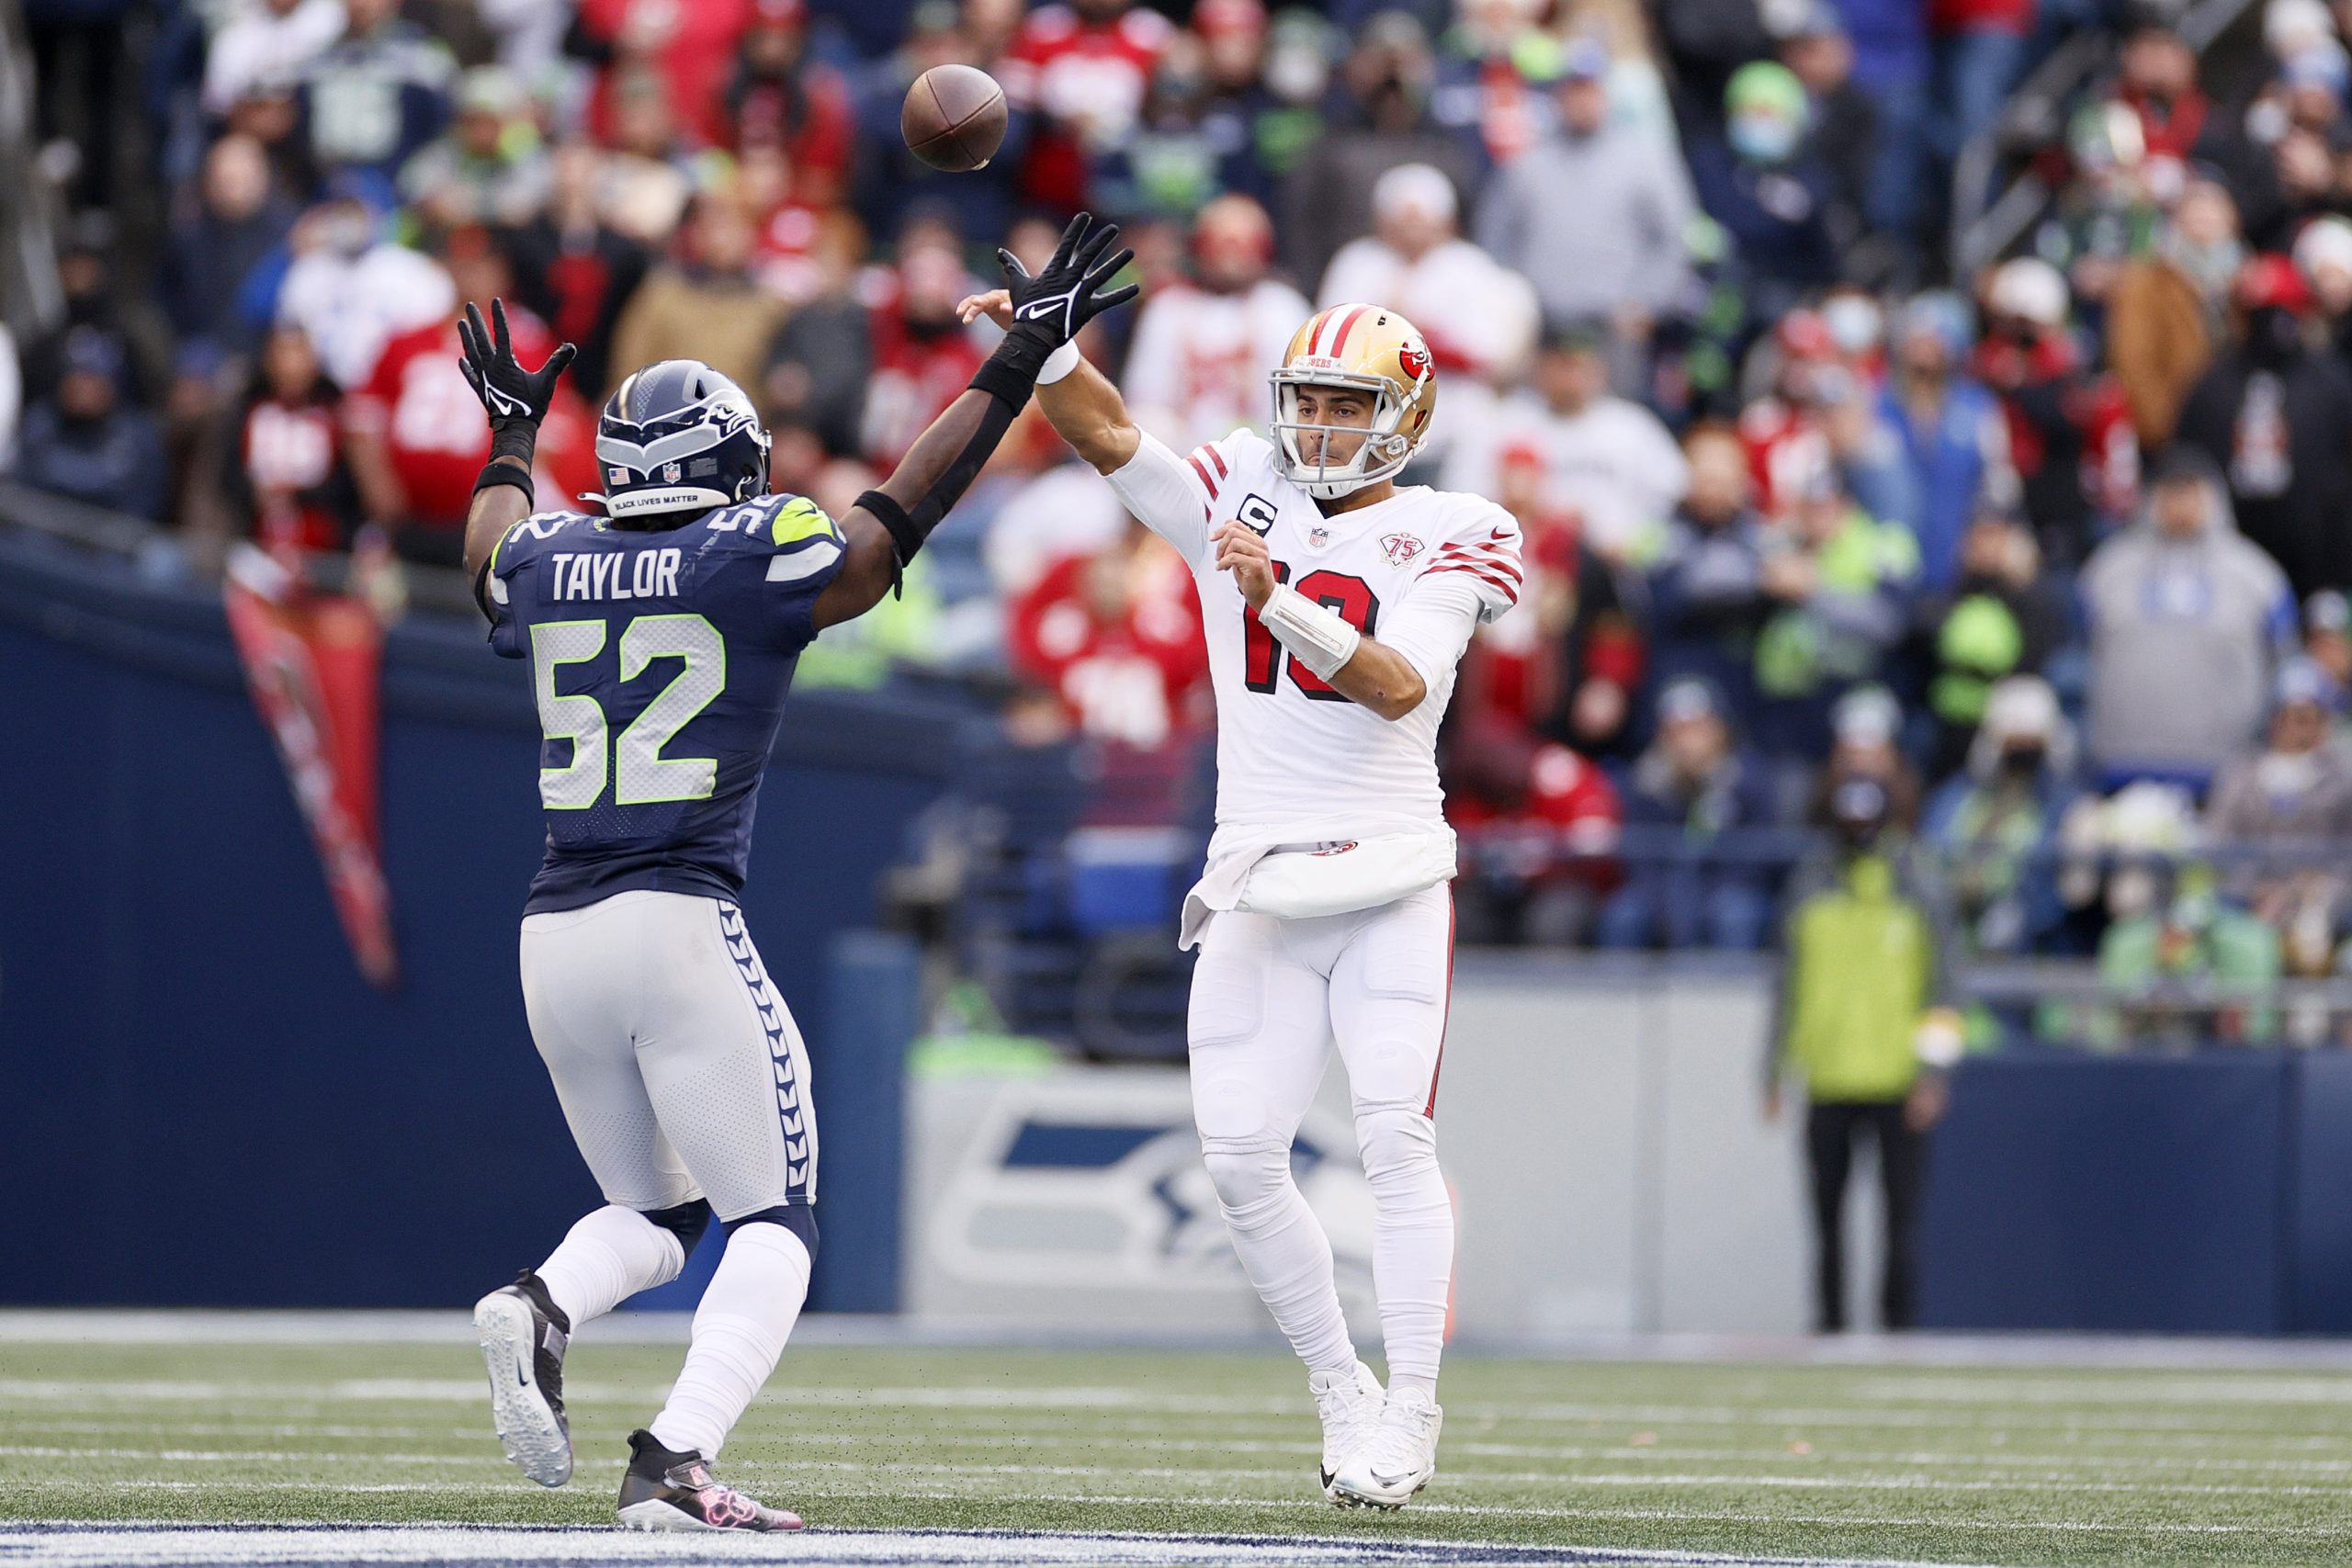 Darrell Taylor #52 of the Seattle Seahawks pressures Jimmy Garoppolo #10 of the San Francisco 49ers...